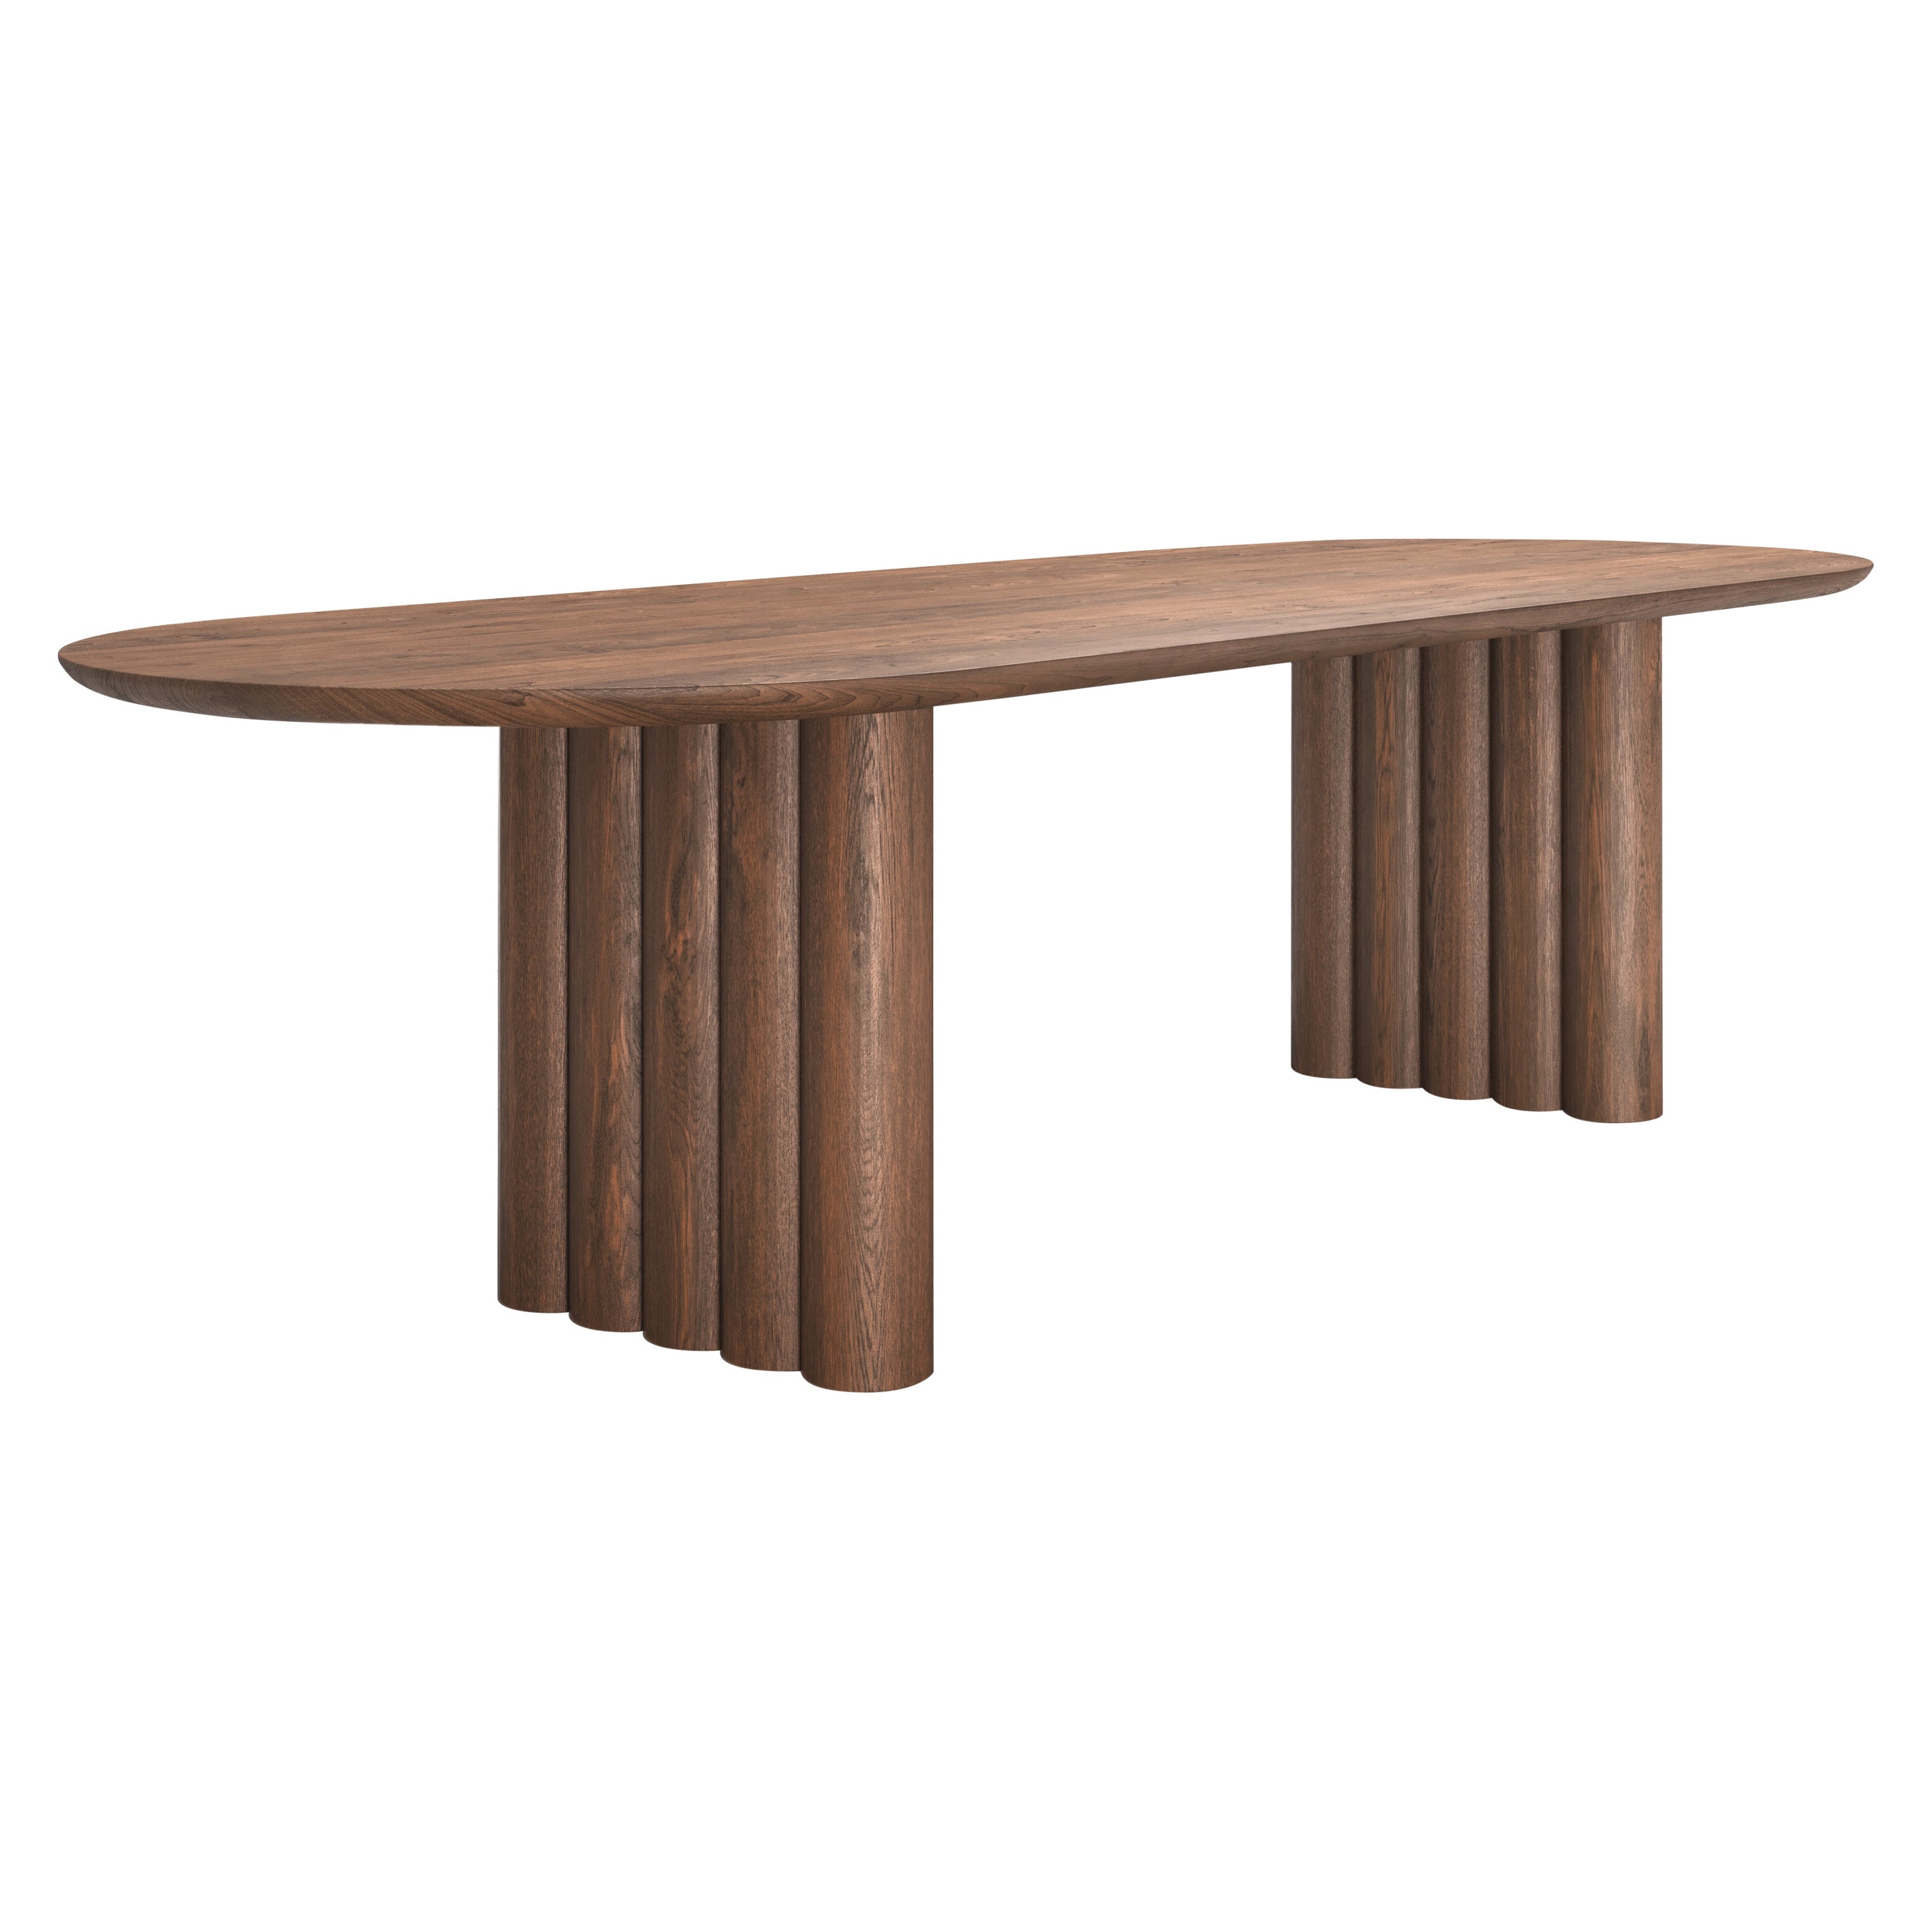 Contemporary Dining Table 'Plush' by Dk3, Smoked Oak or Walnut, 370